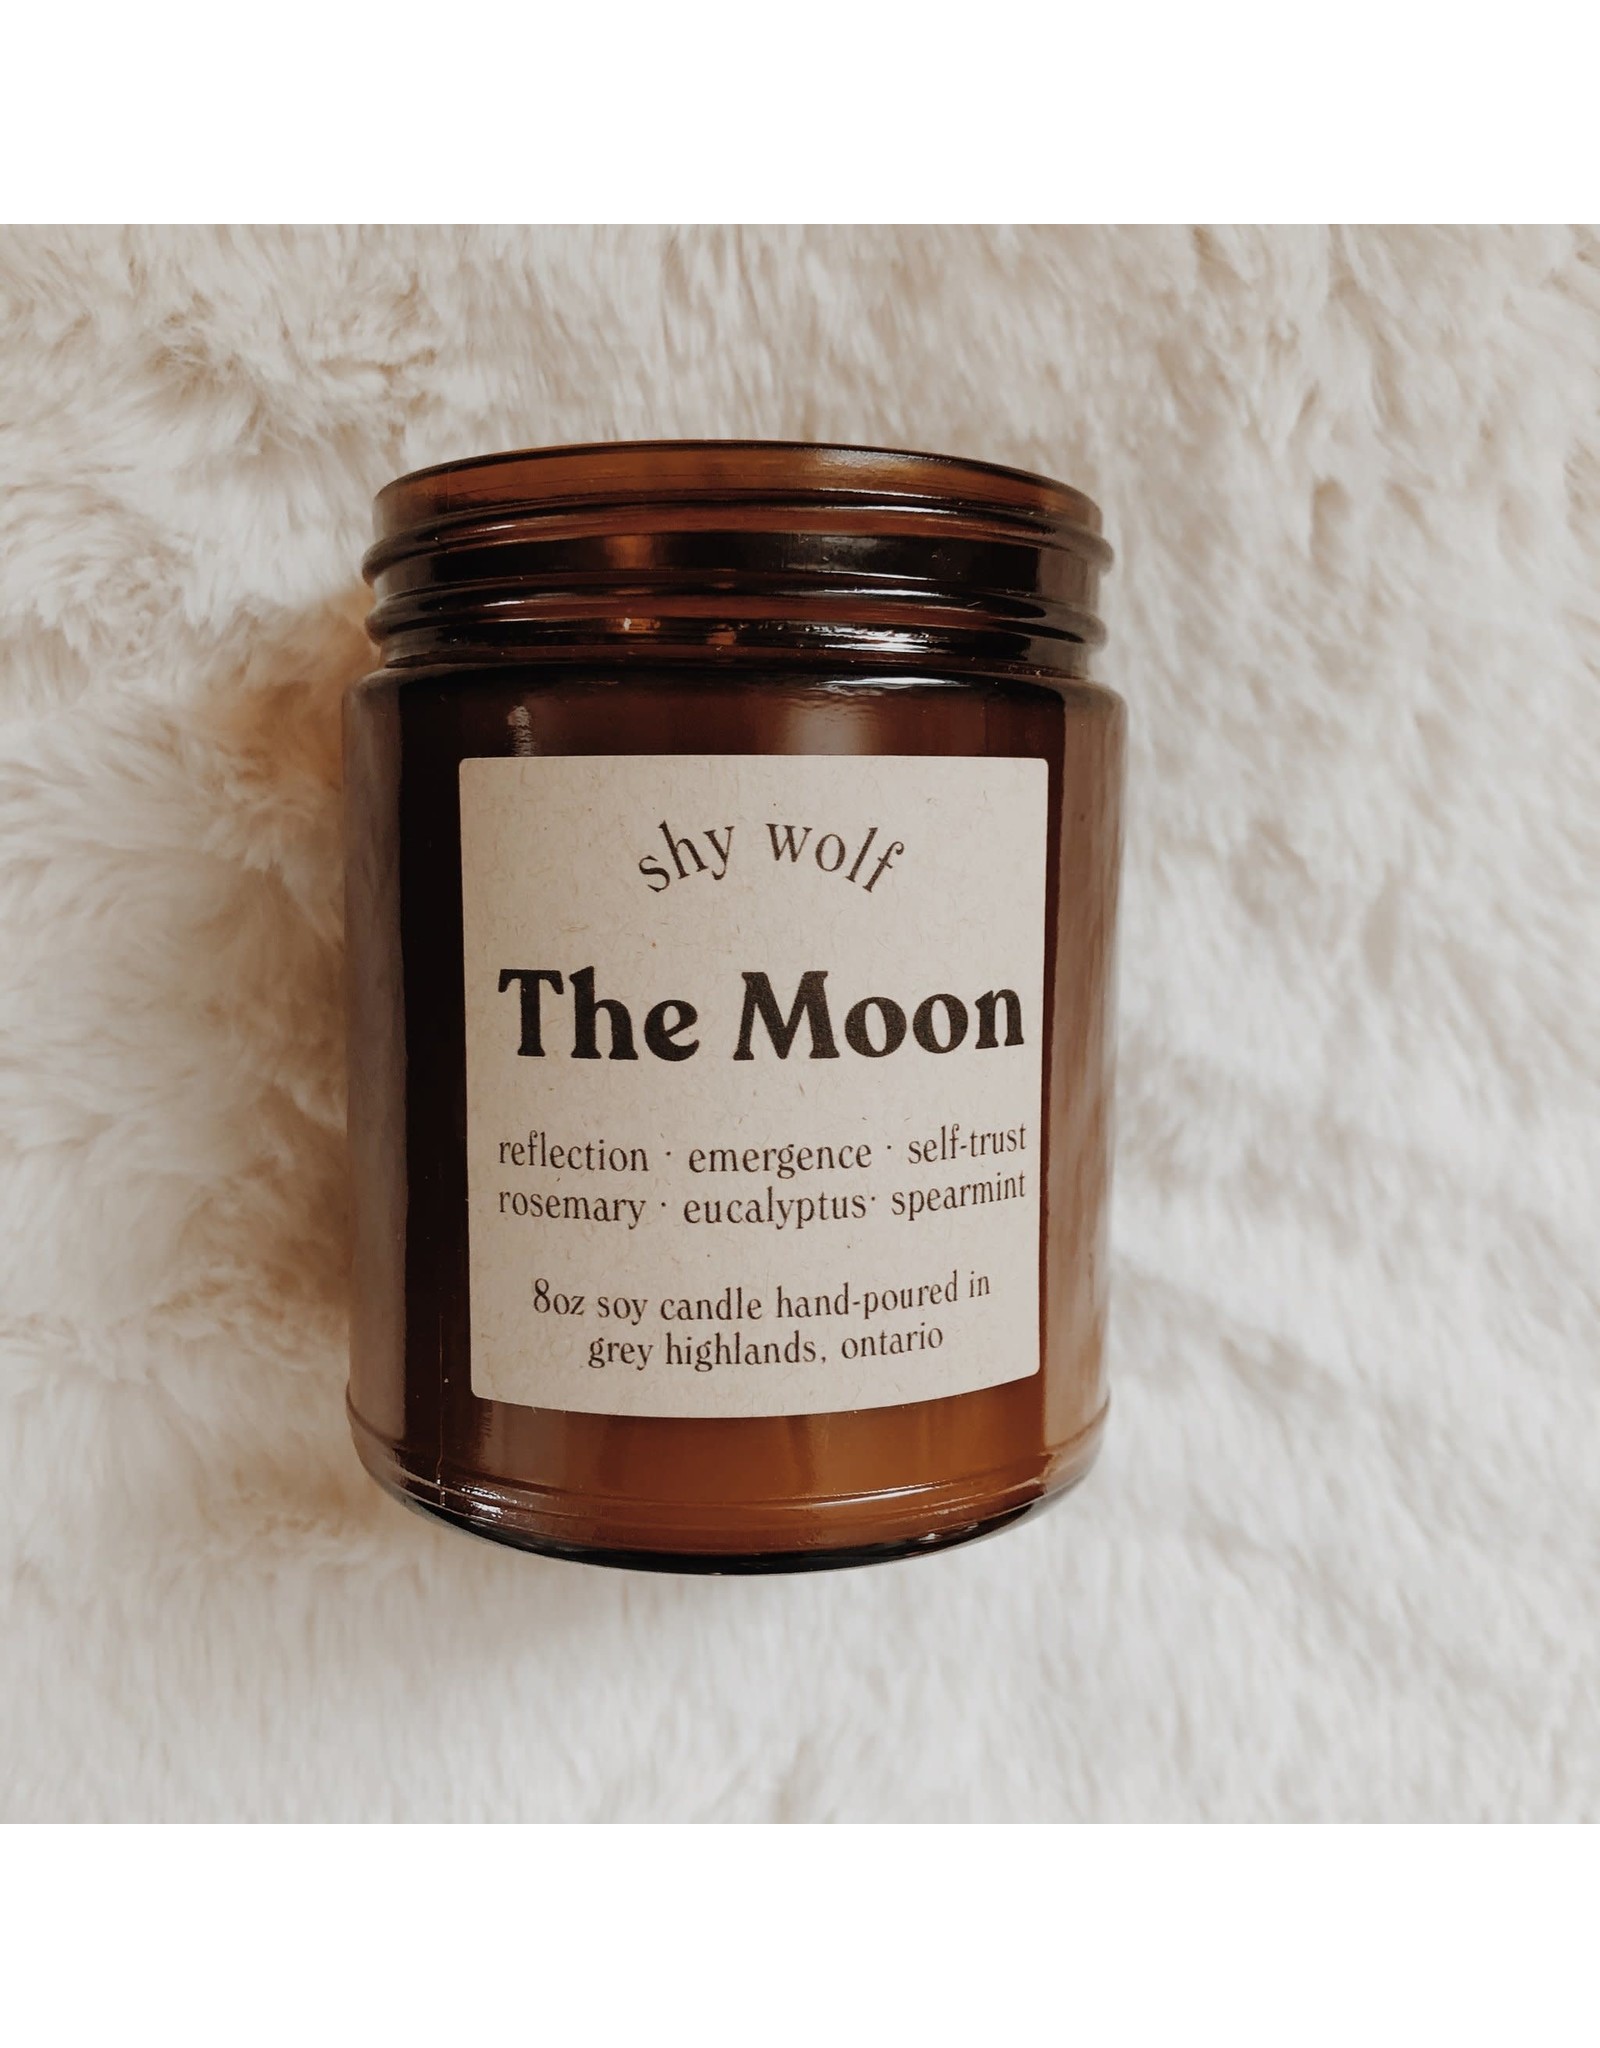 Shy Wolf - Soy Candle / The Moon, Tarot Collection, 8oz